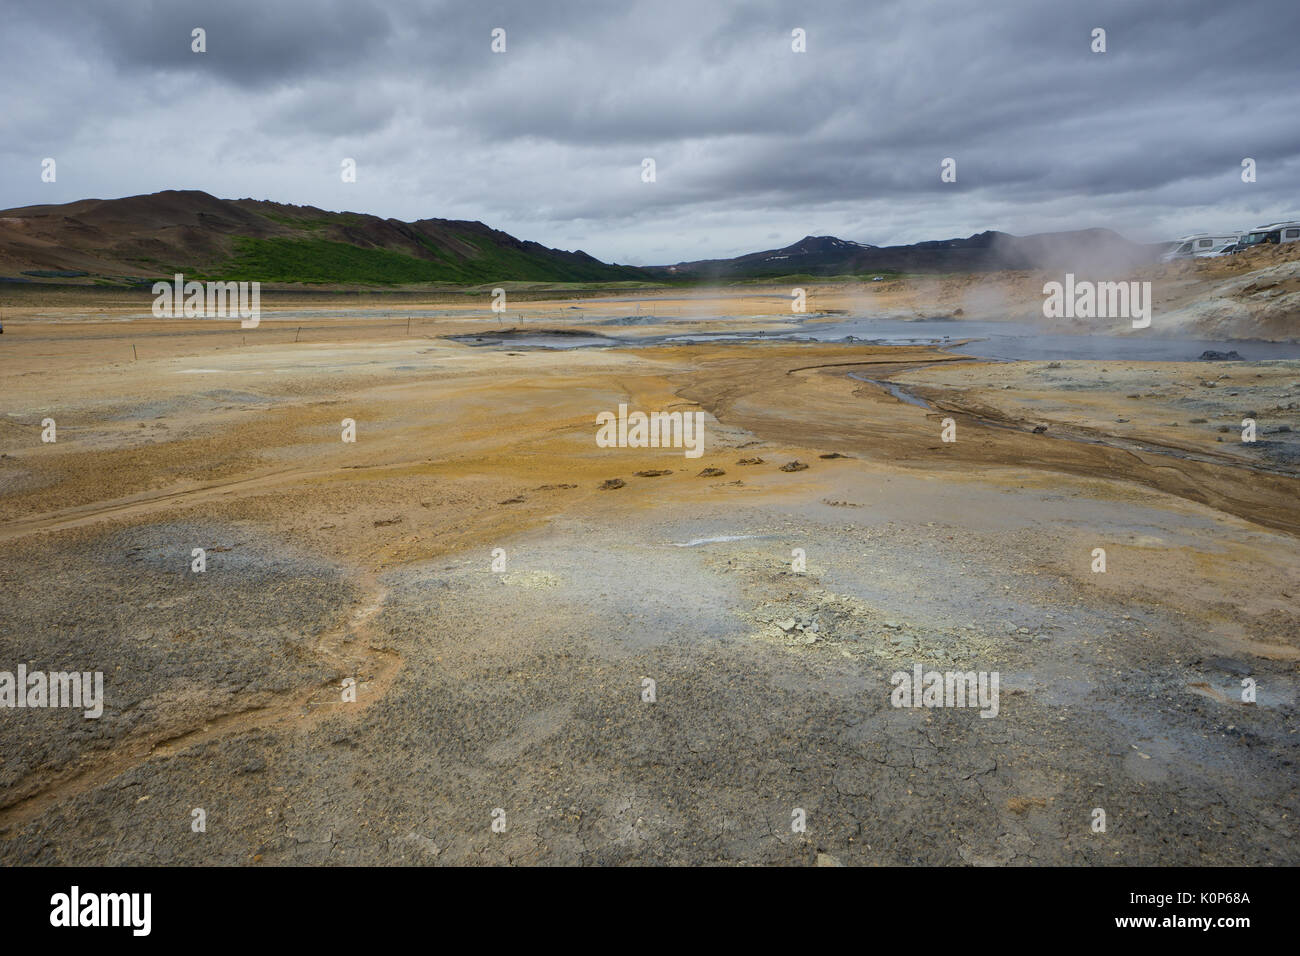 Iceland - Hot spring and mud pots at geothermal area hverir near myvatn and green volcanoes Stock Photo